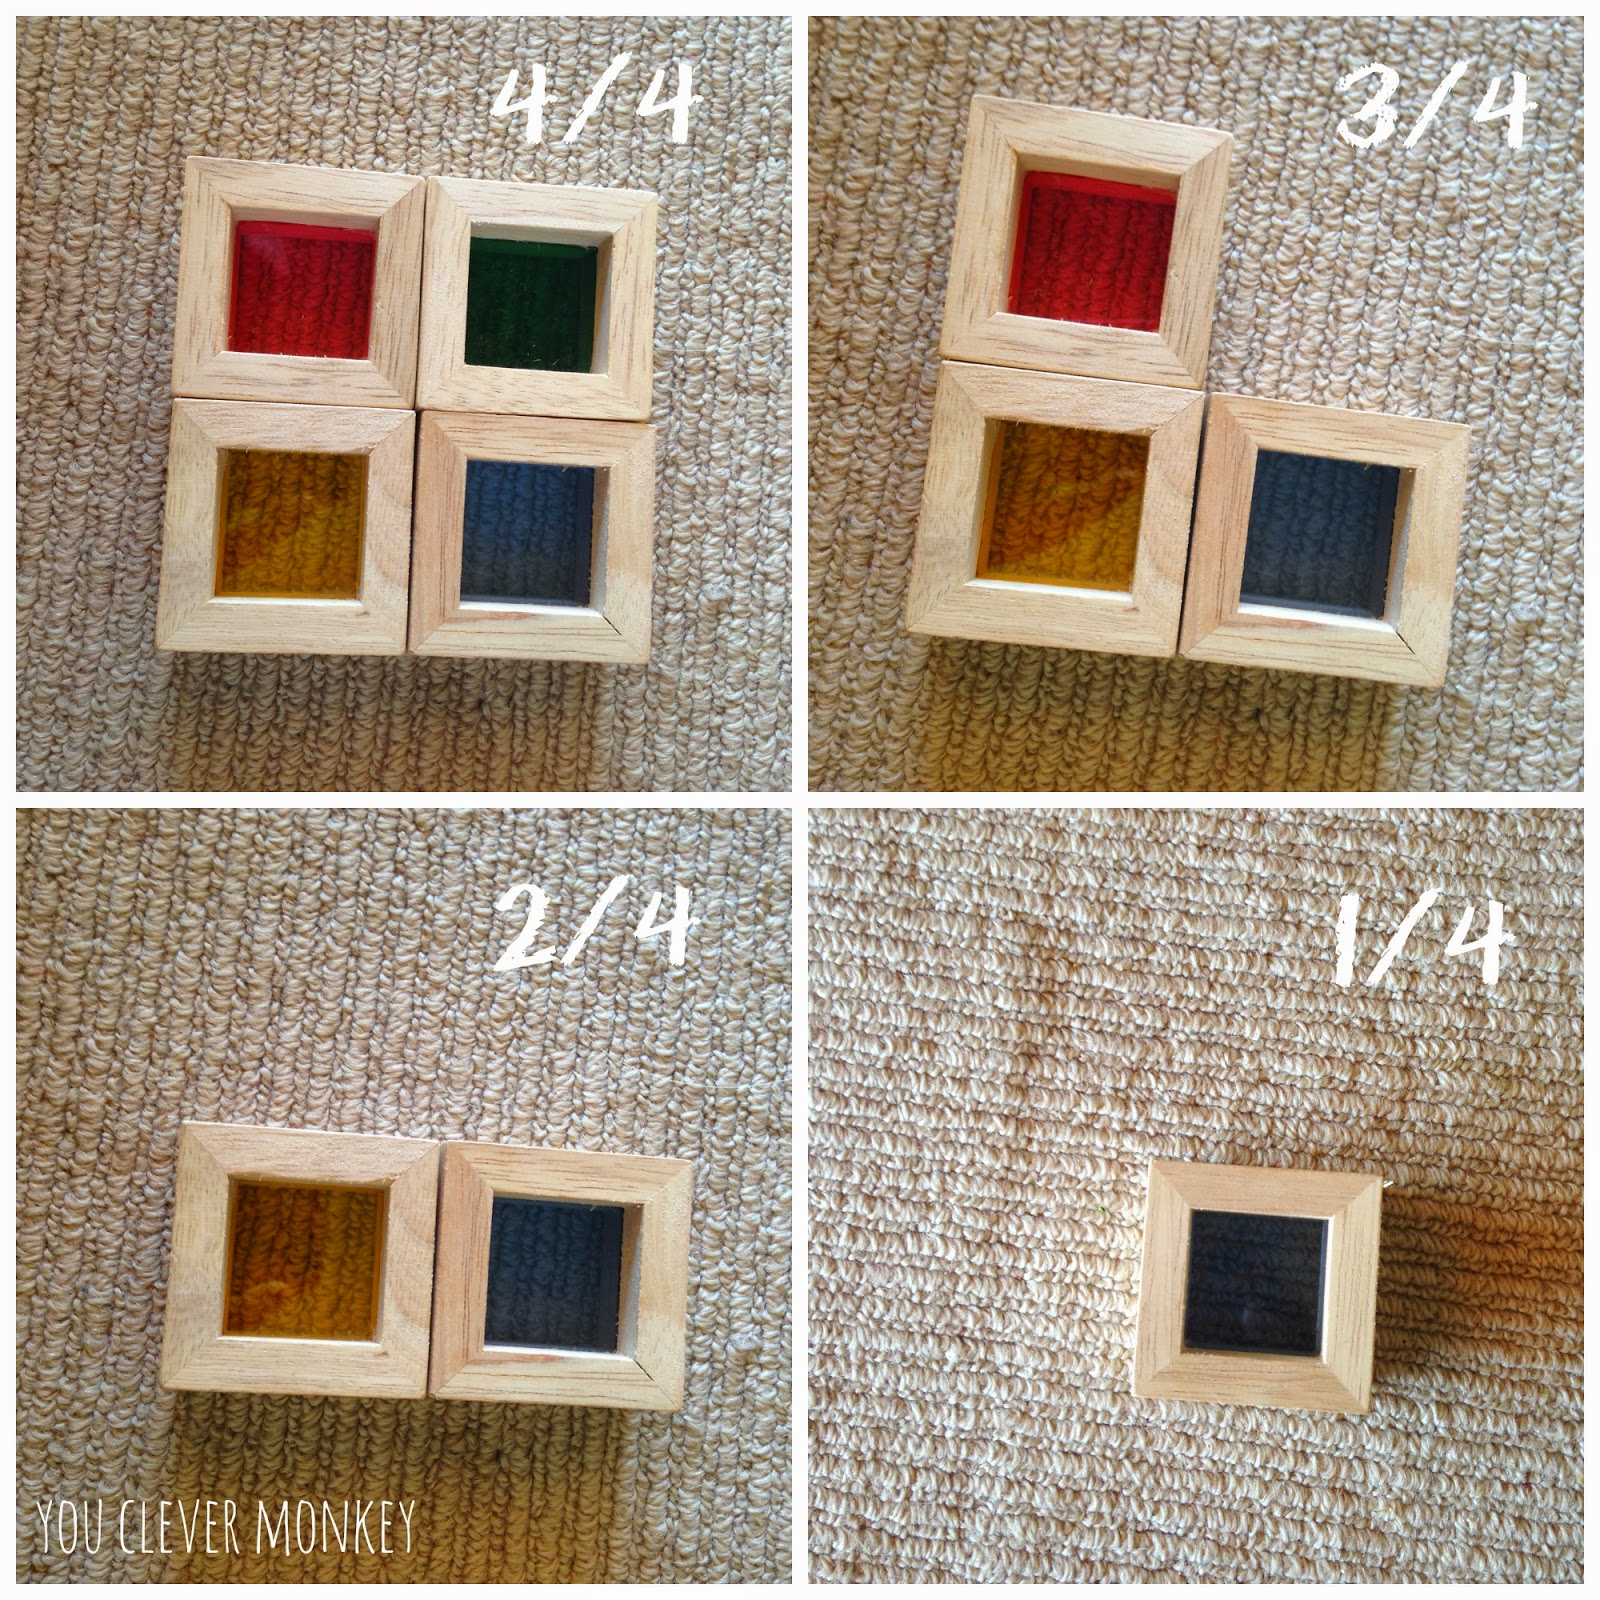 Exploring fractions with wooden rainbow blocks.  For more, visit www.youclevermonkey.com